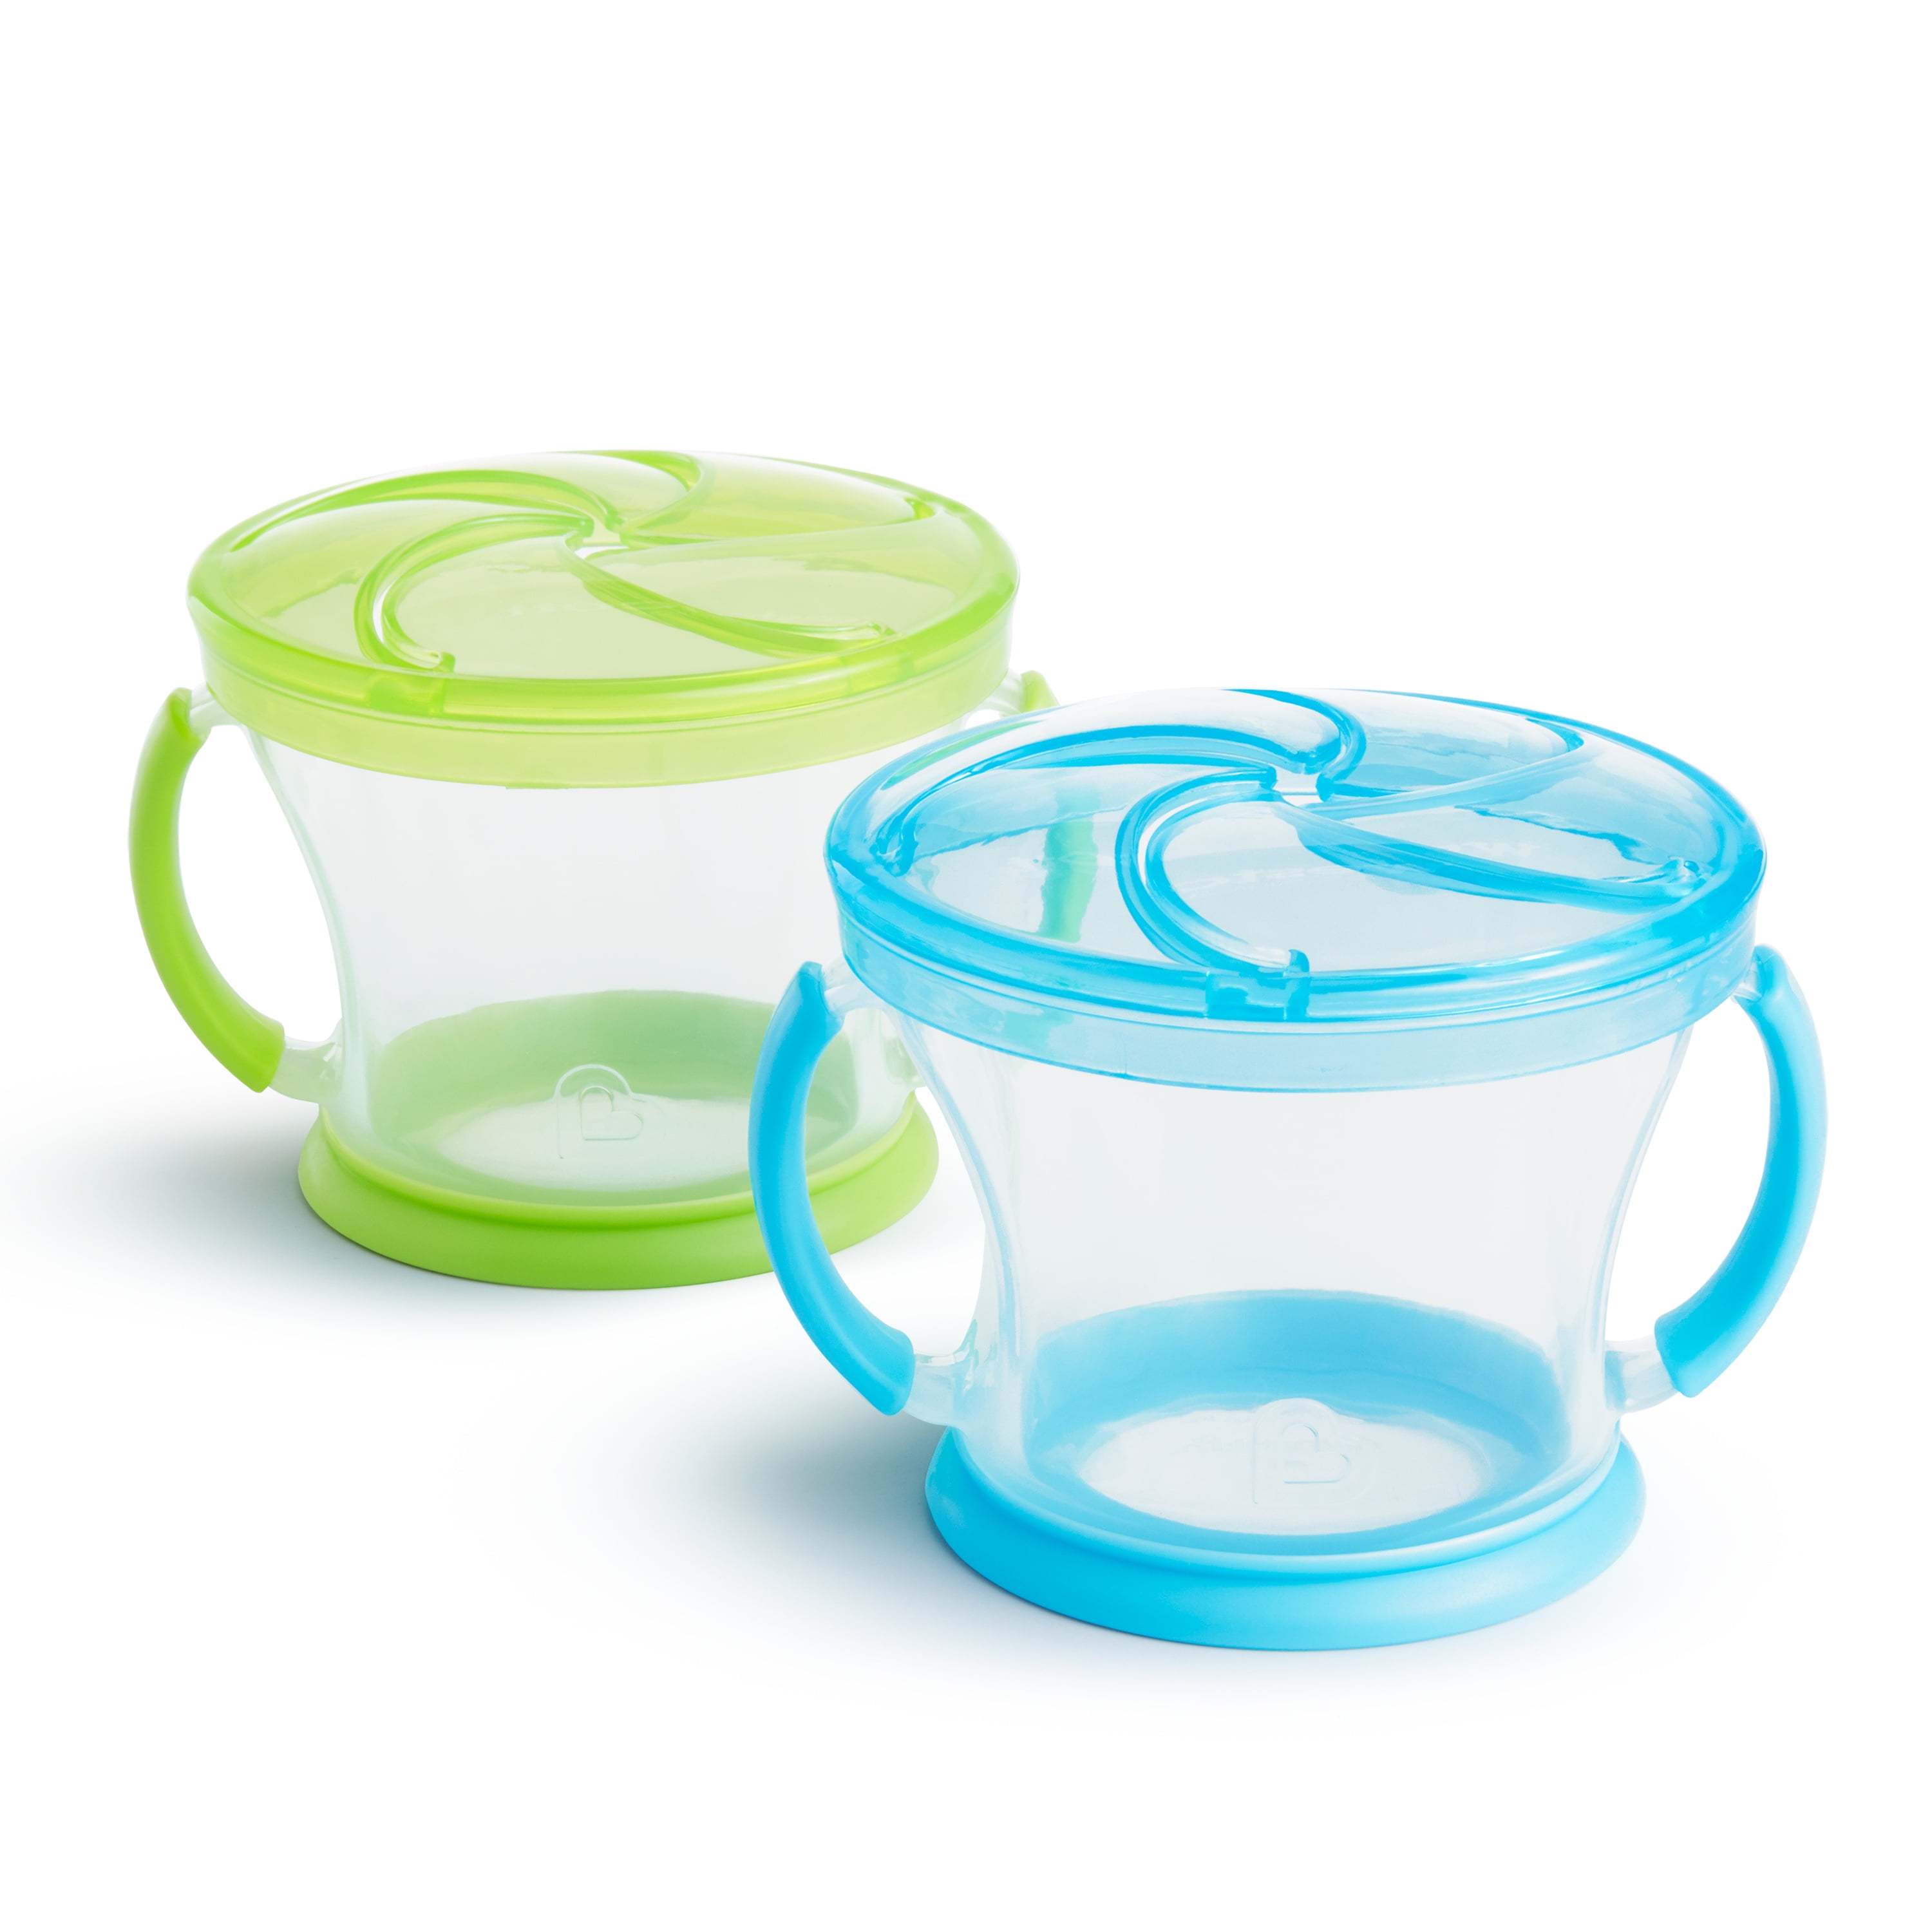 SnackCatch & Sip™ 2-in-1 Snack Catcher & Spill-Proof Cup, 9oz